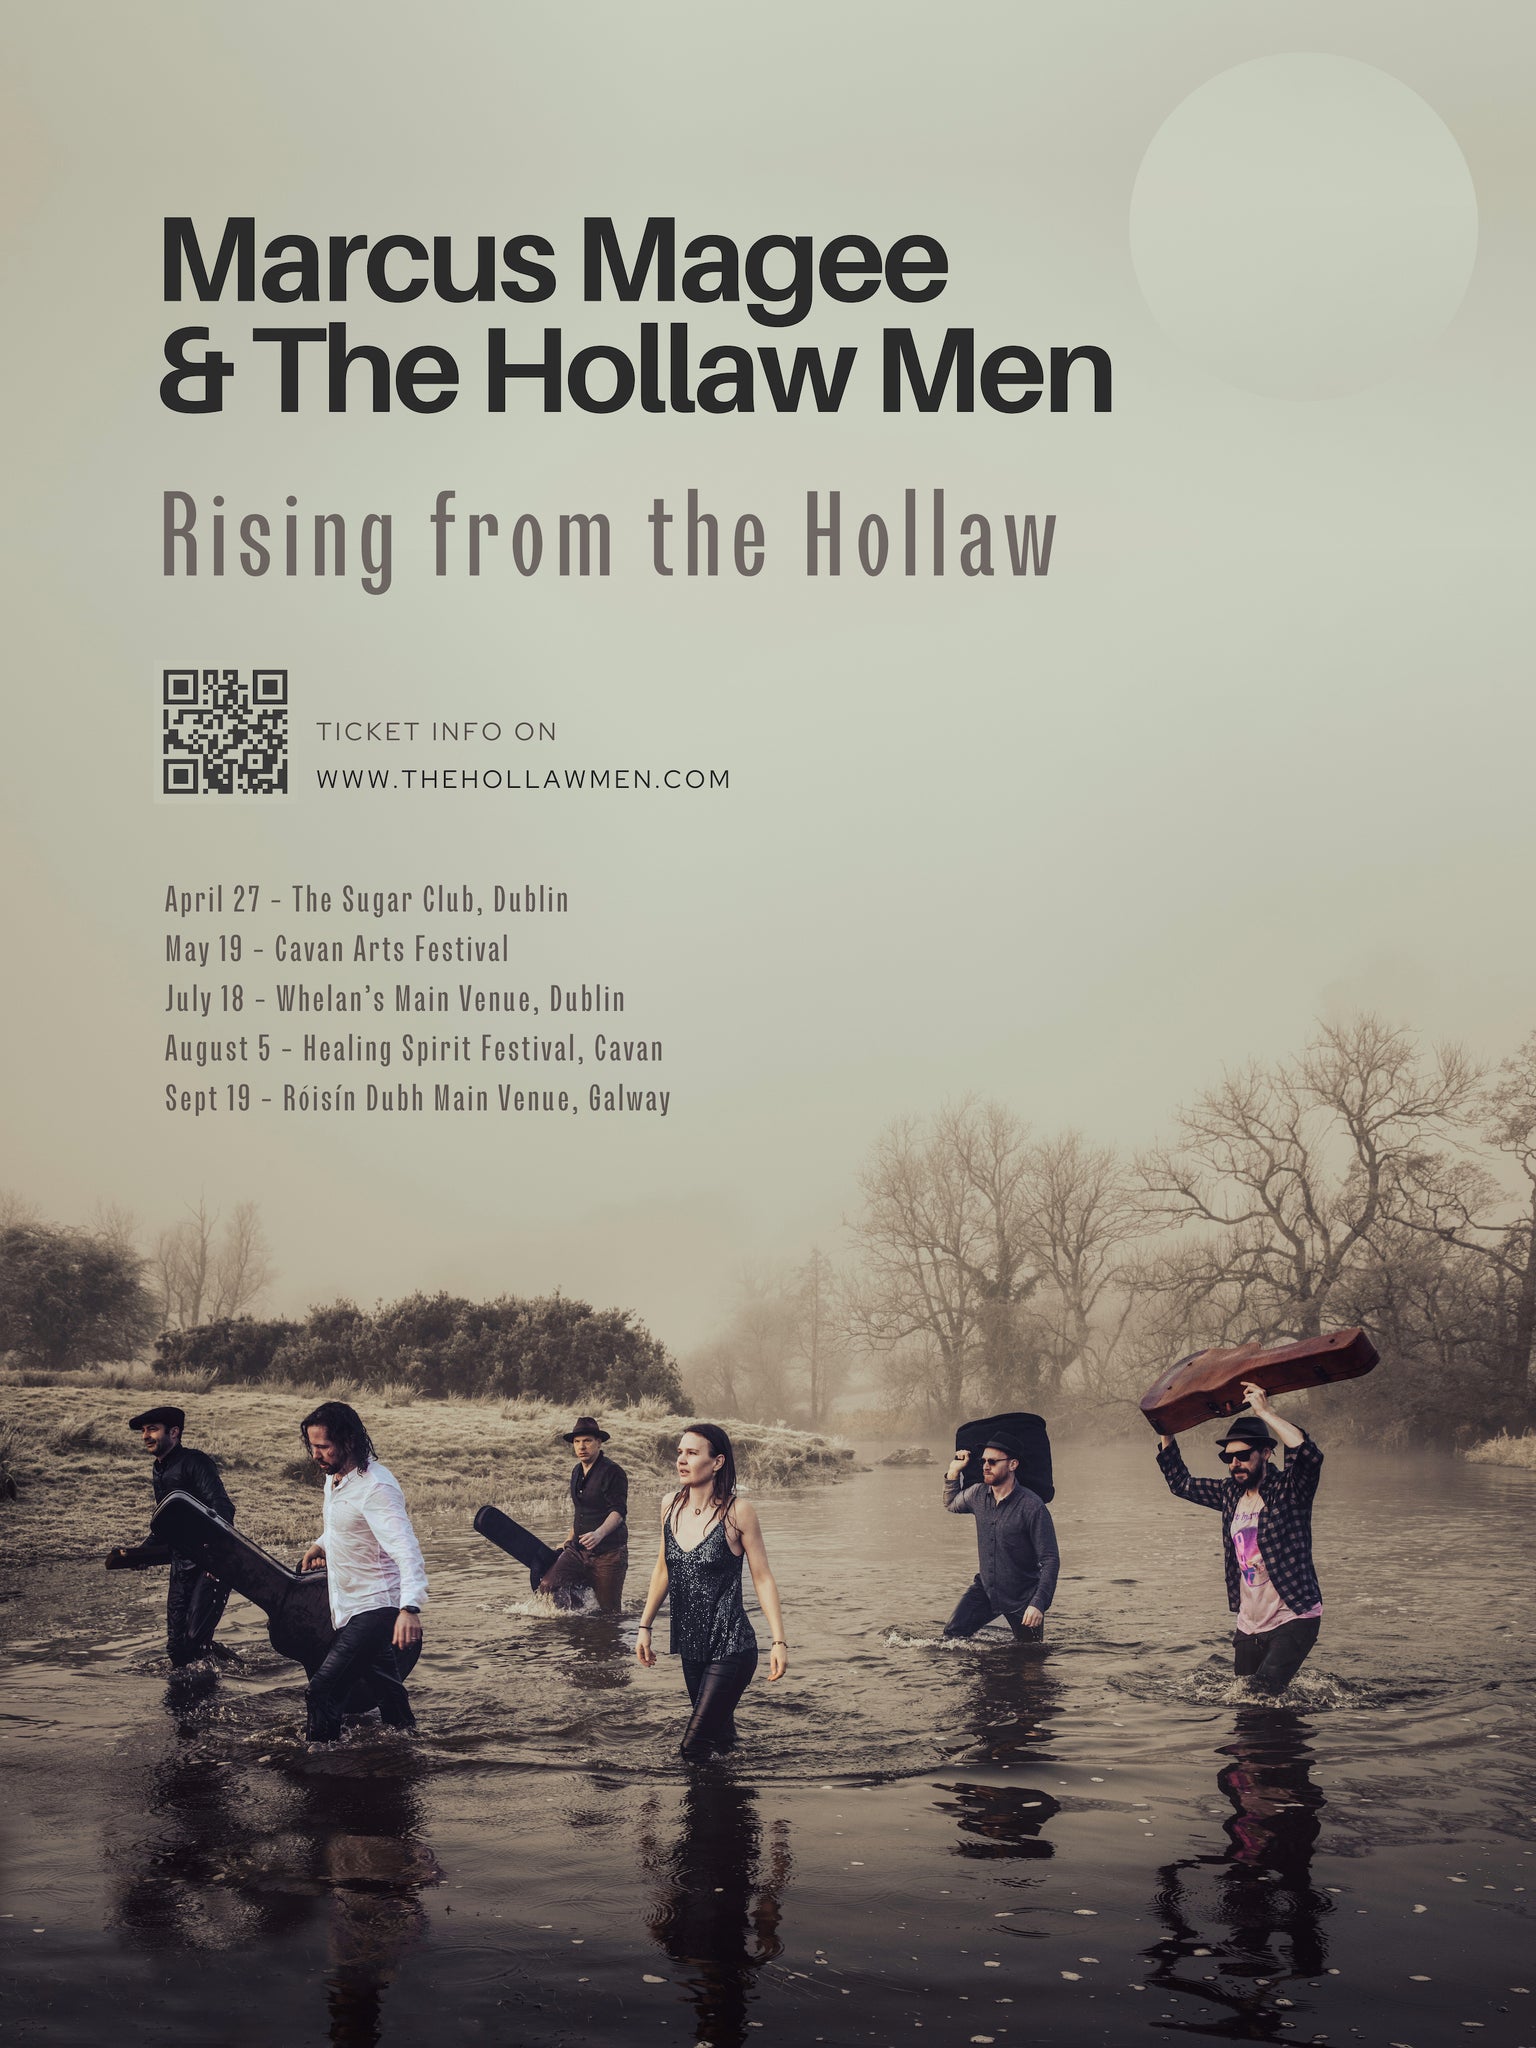 MARCUS MAGEE & THE HOLLAW MEN - Rising From The Hollaw - CD [APR 26]